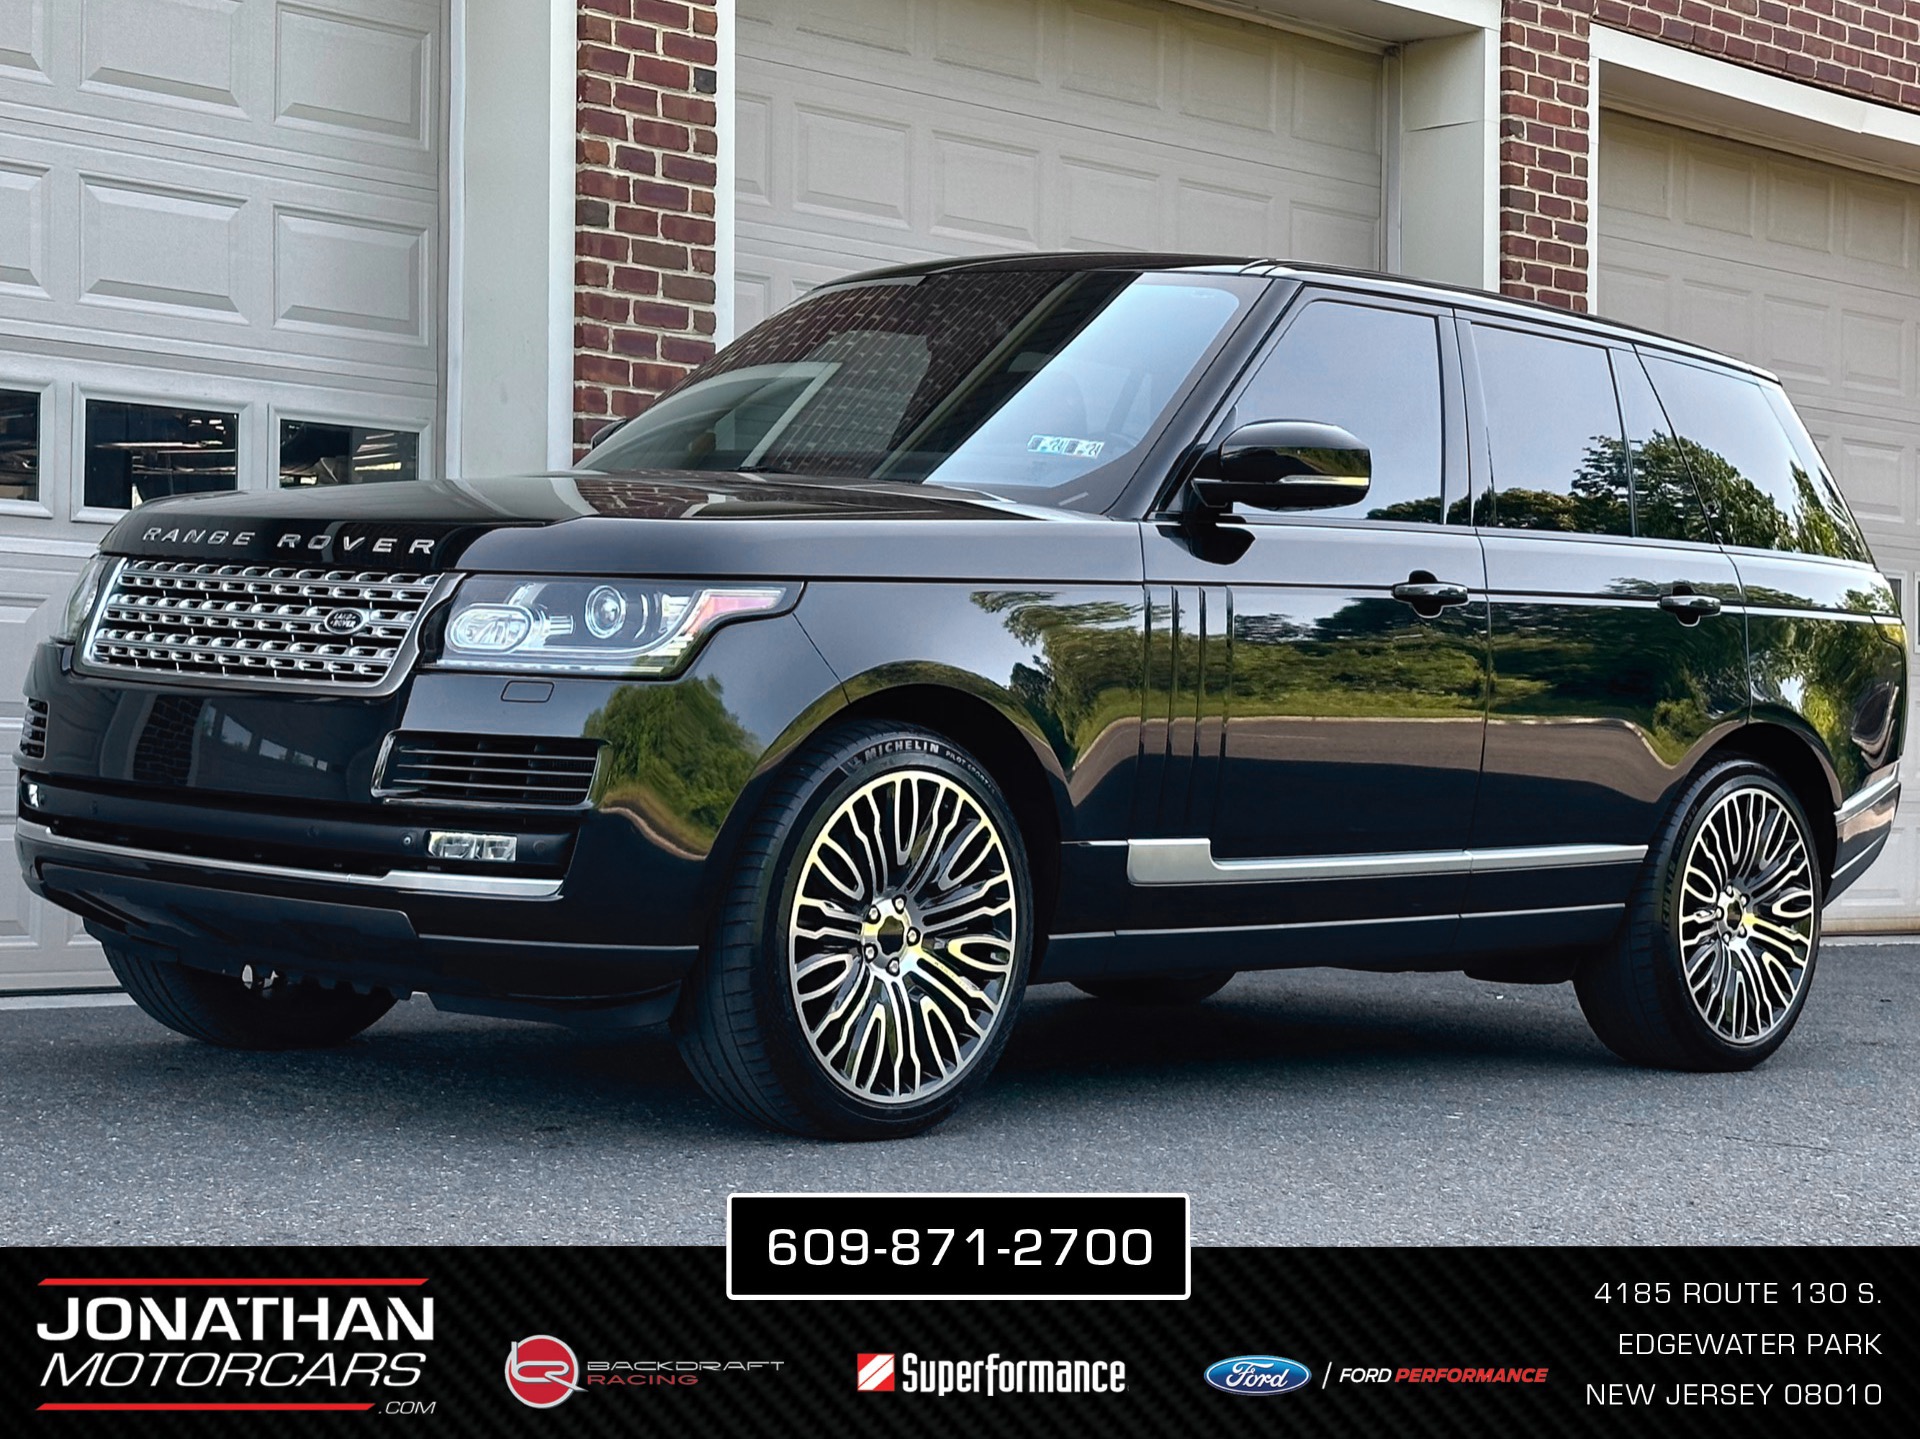 Used 2014 Land Rover Range Rover Supercharged | Edgewater Park, NJ